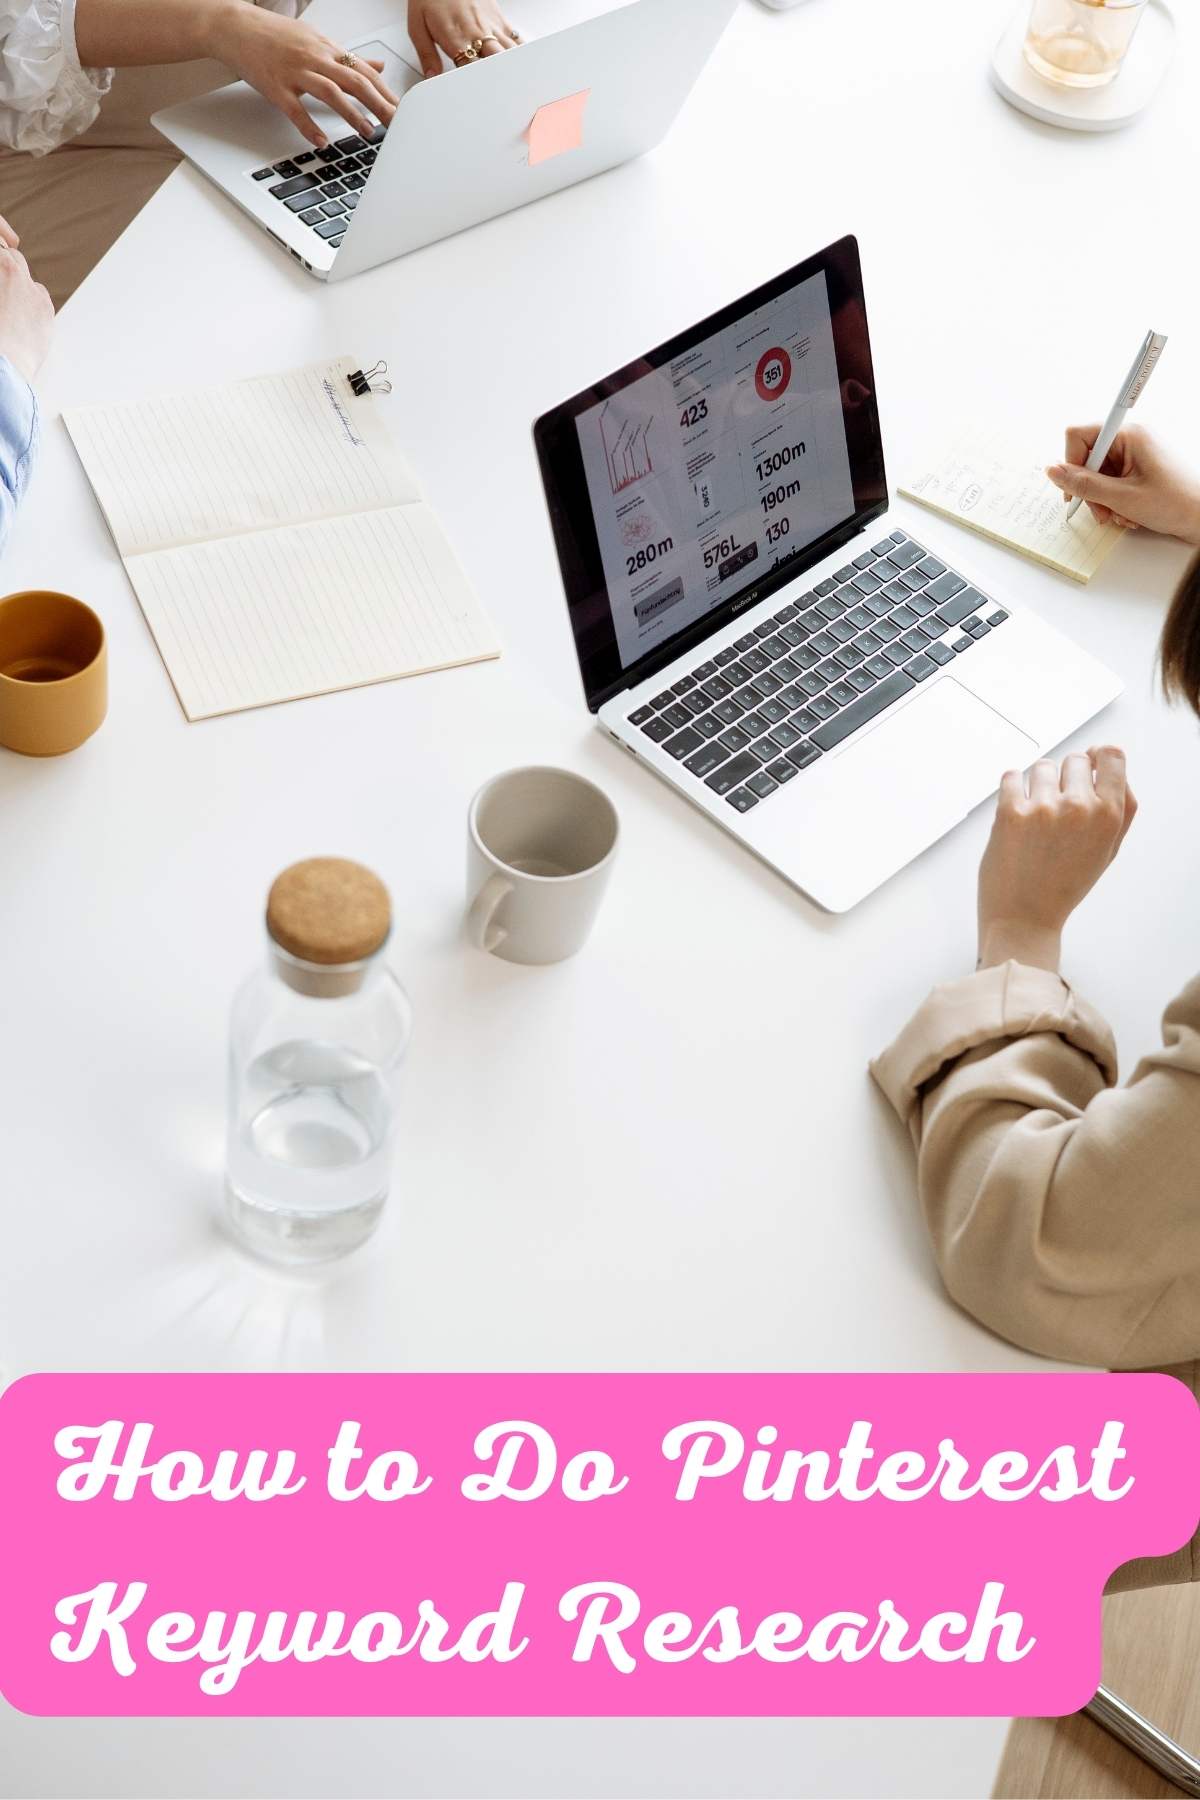 How to do Pinterest keyword research